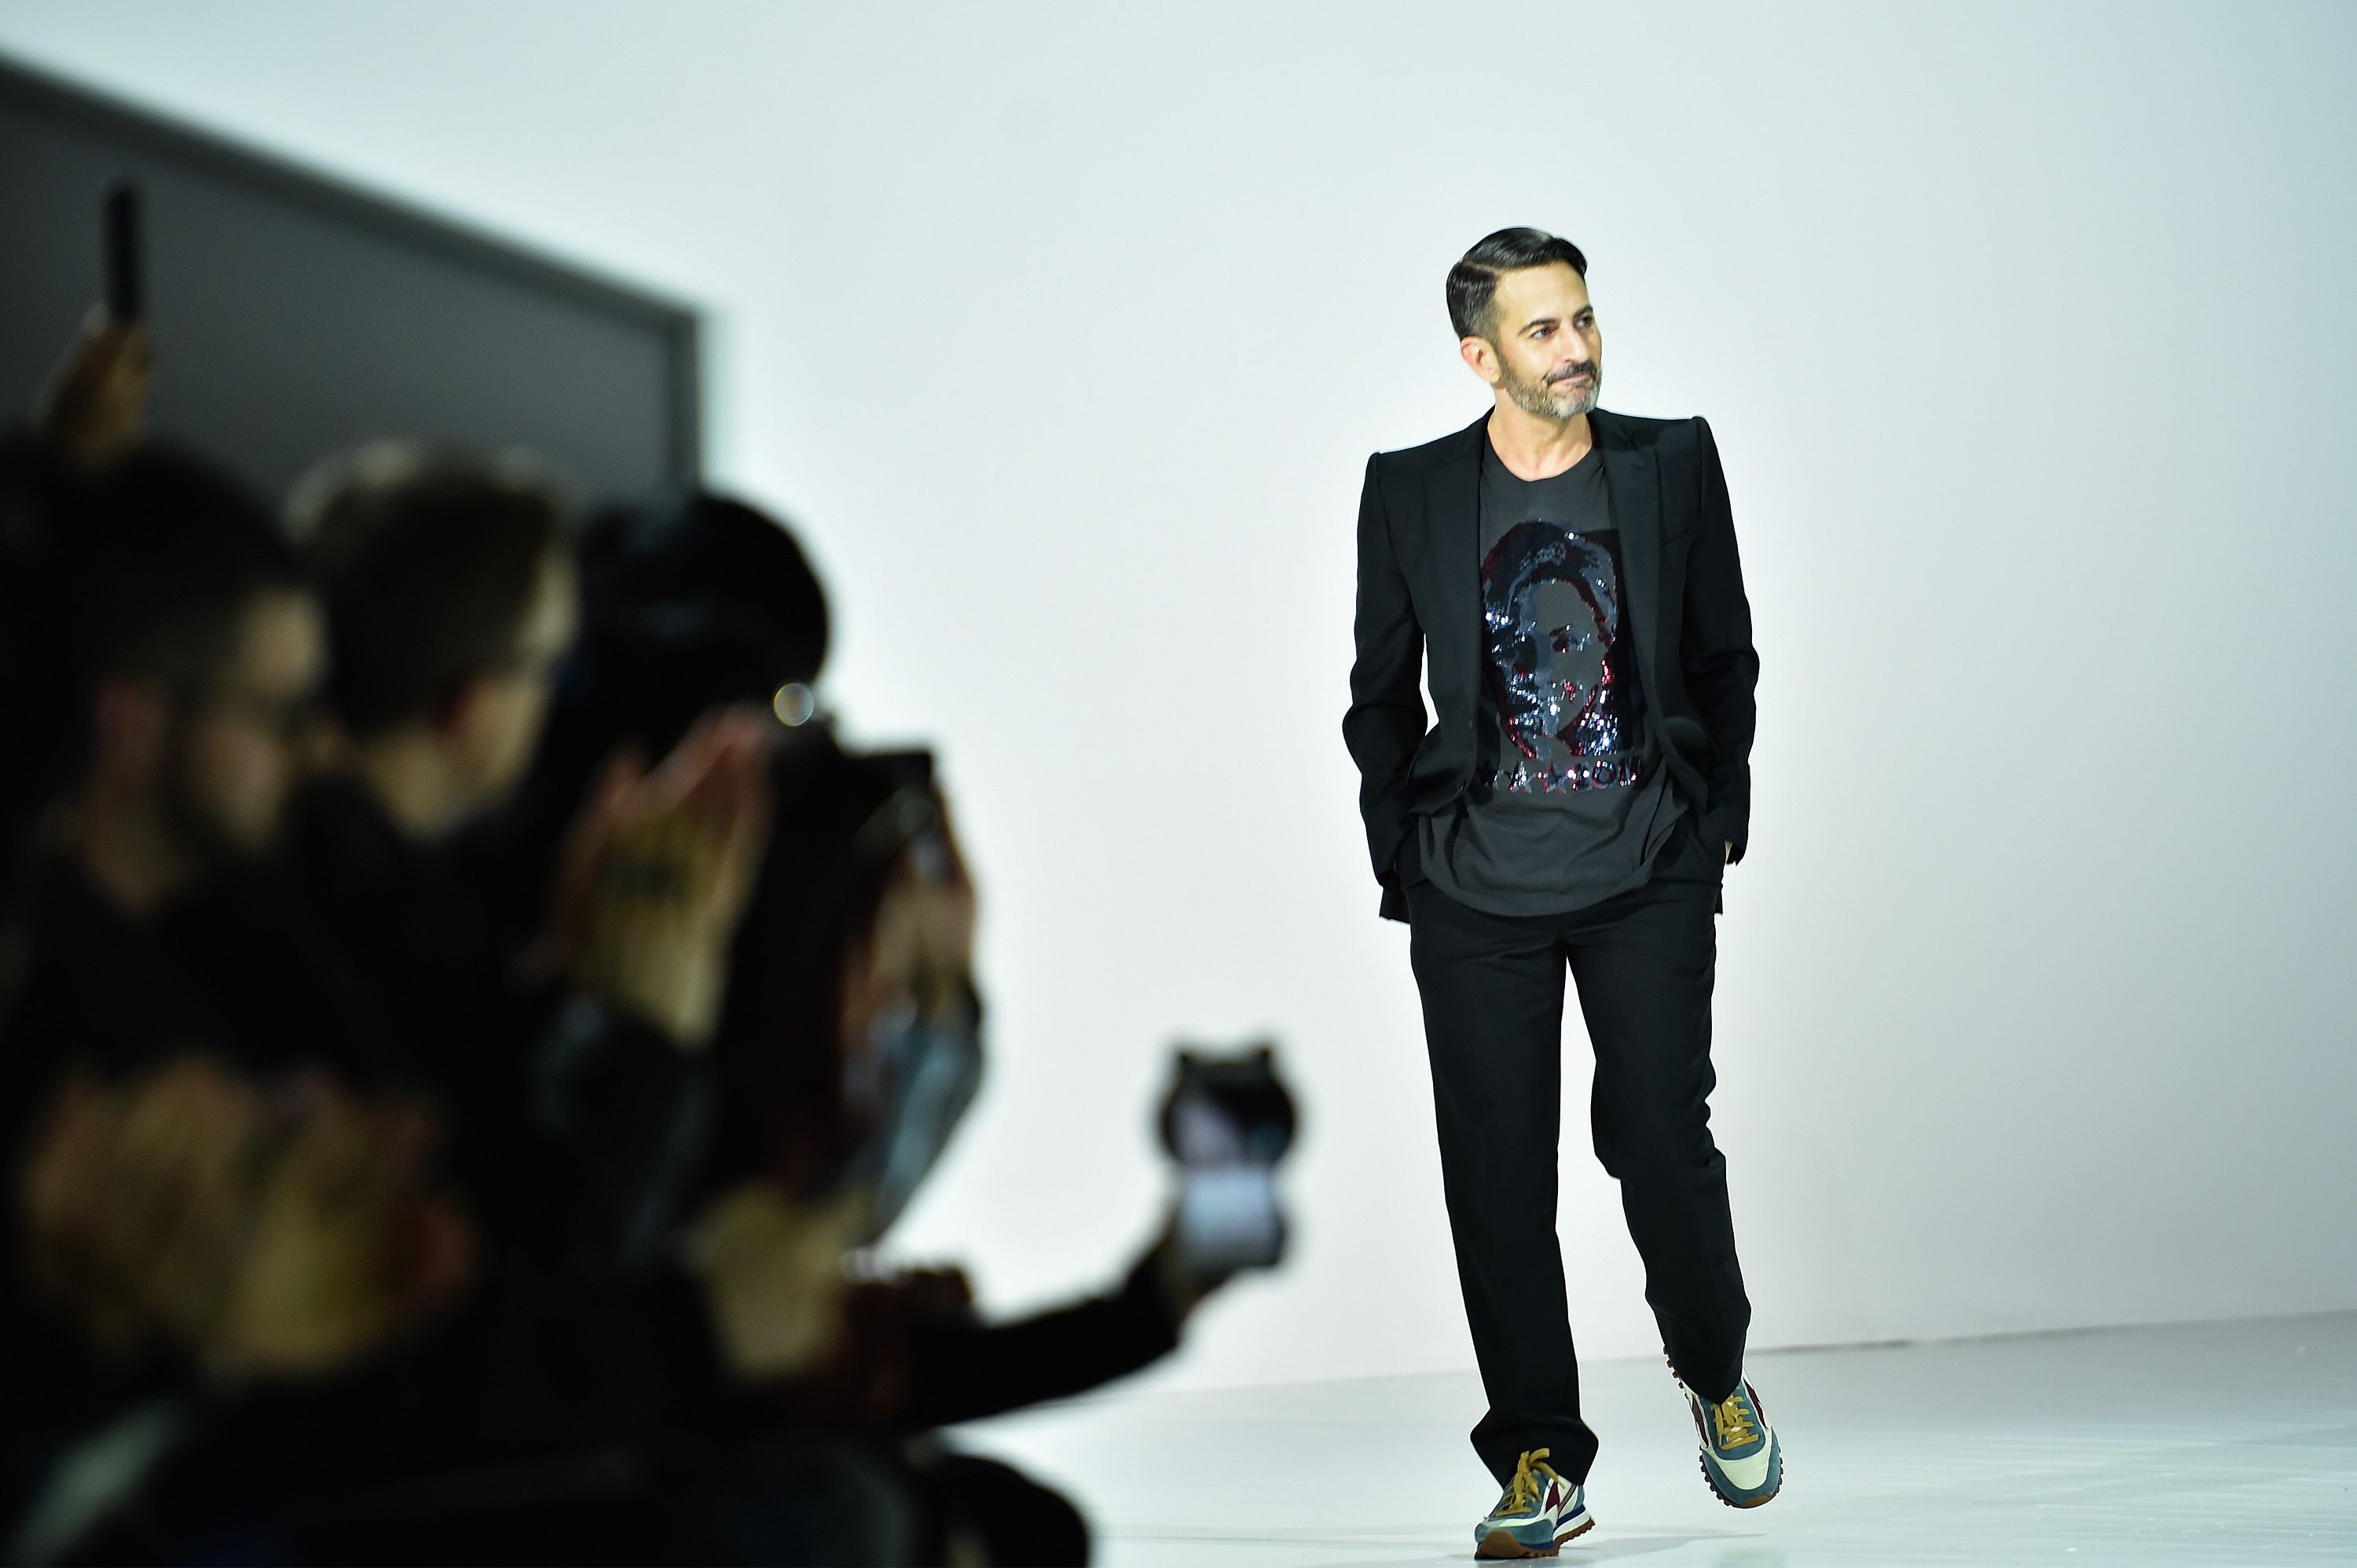 Verfijning Generaliseren waarom niet Marc Jacobs: "I don't have to fit into a mould or choose one path"